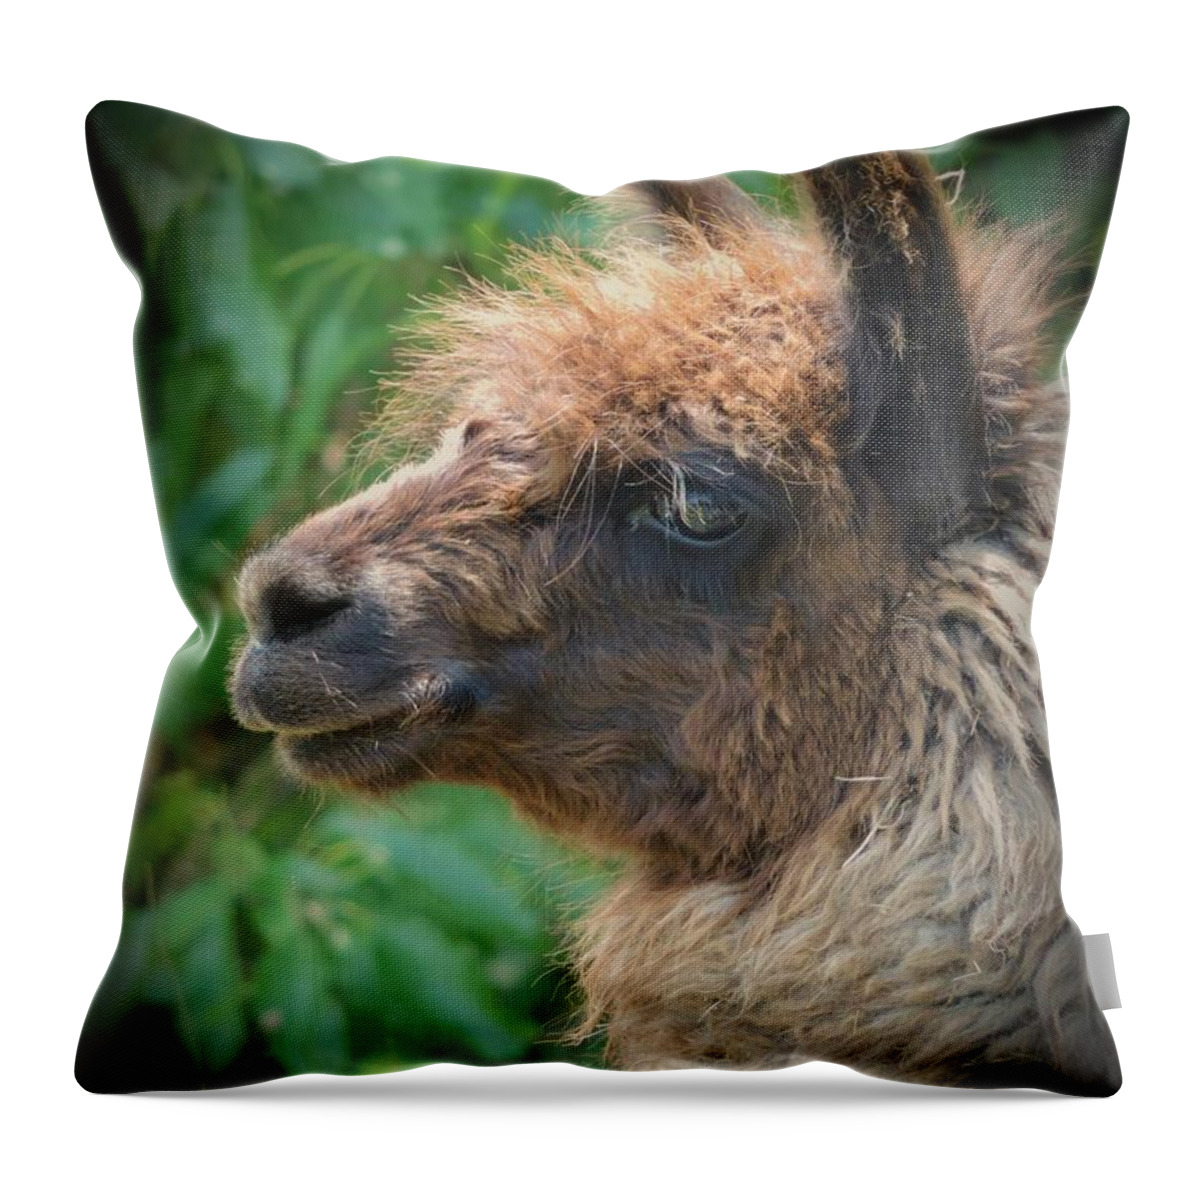 Llama Throw Pillow featuring the photograph Portrait Of A Llama by Robert ONeil